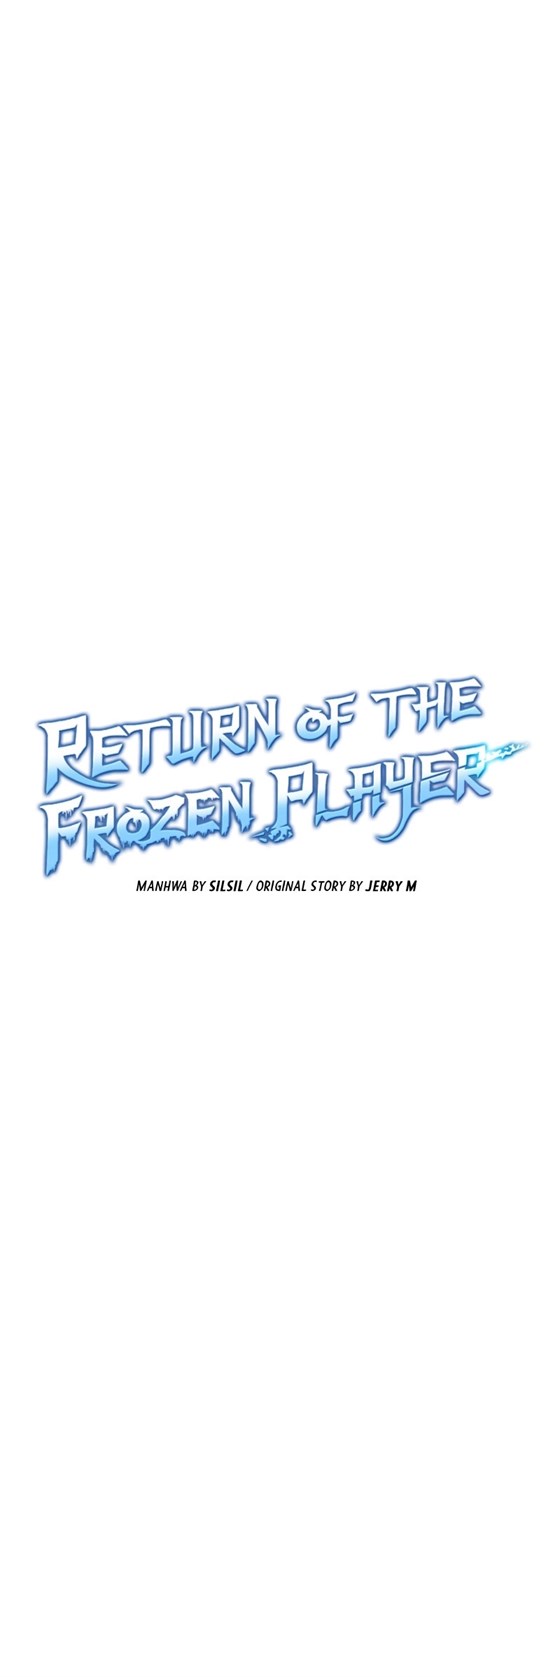 Return of the Frozen Player 35 12